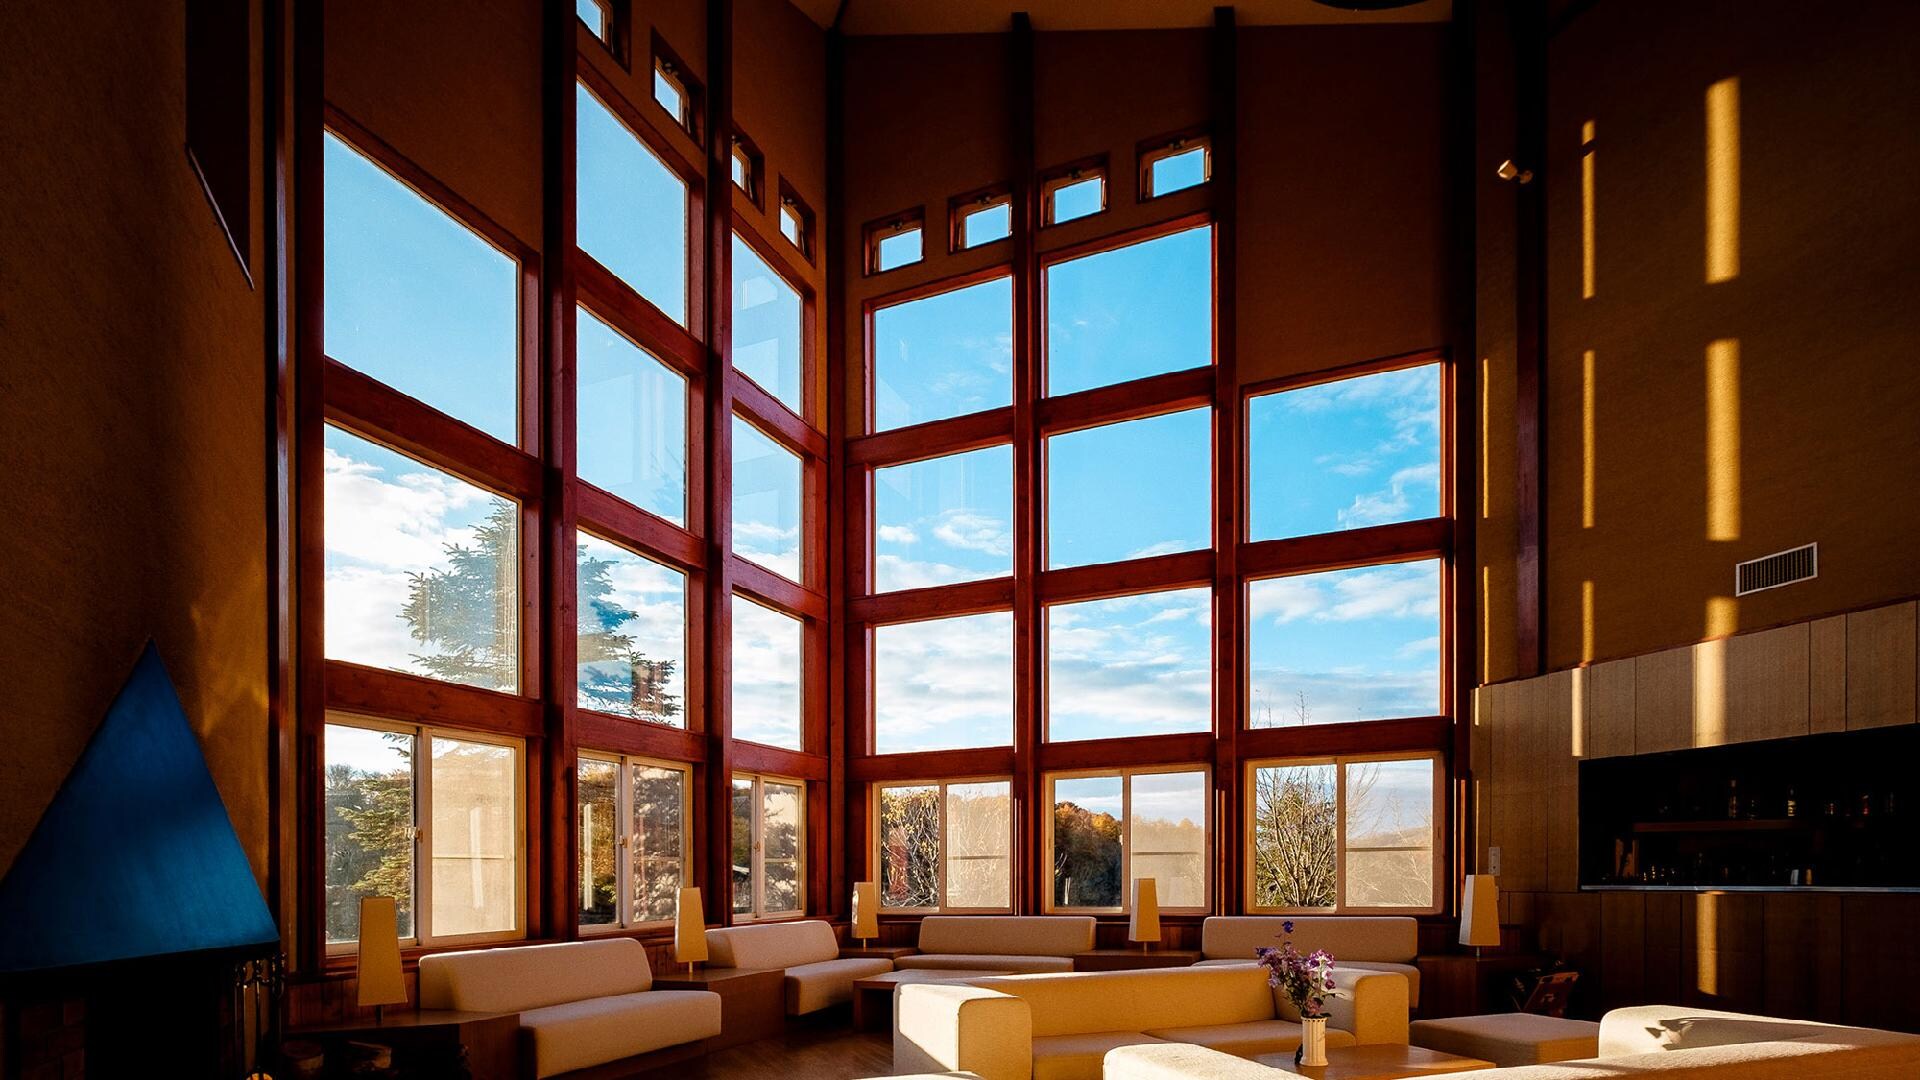 [Lobby] You can enjoy the beautiful blue sky from the large windows.